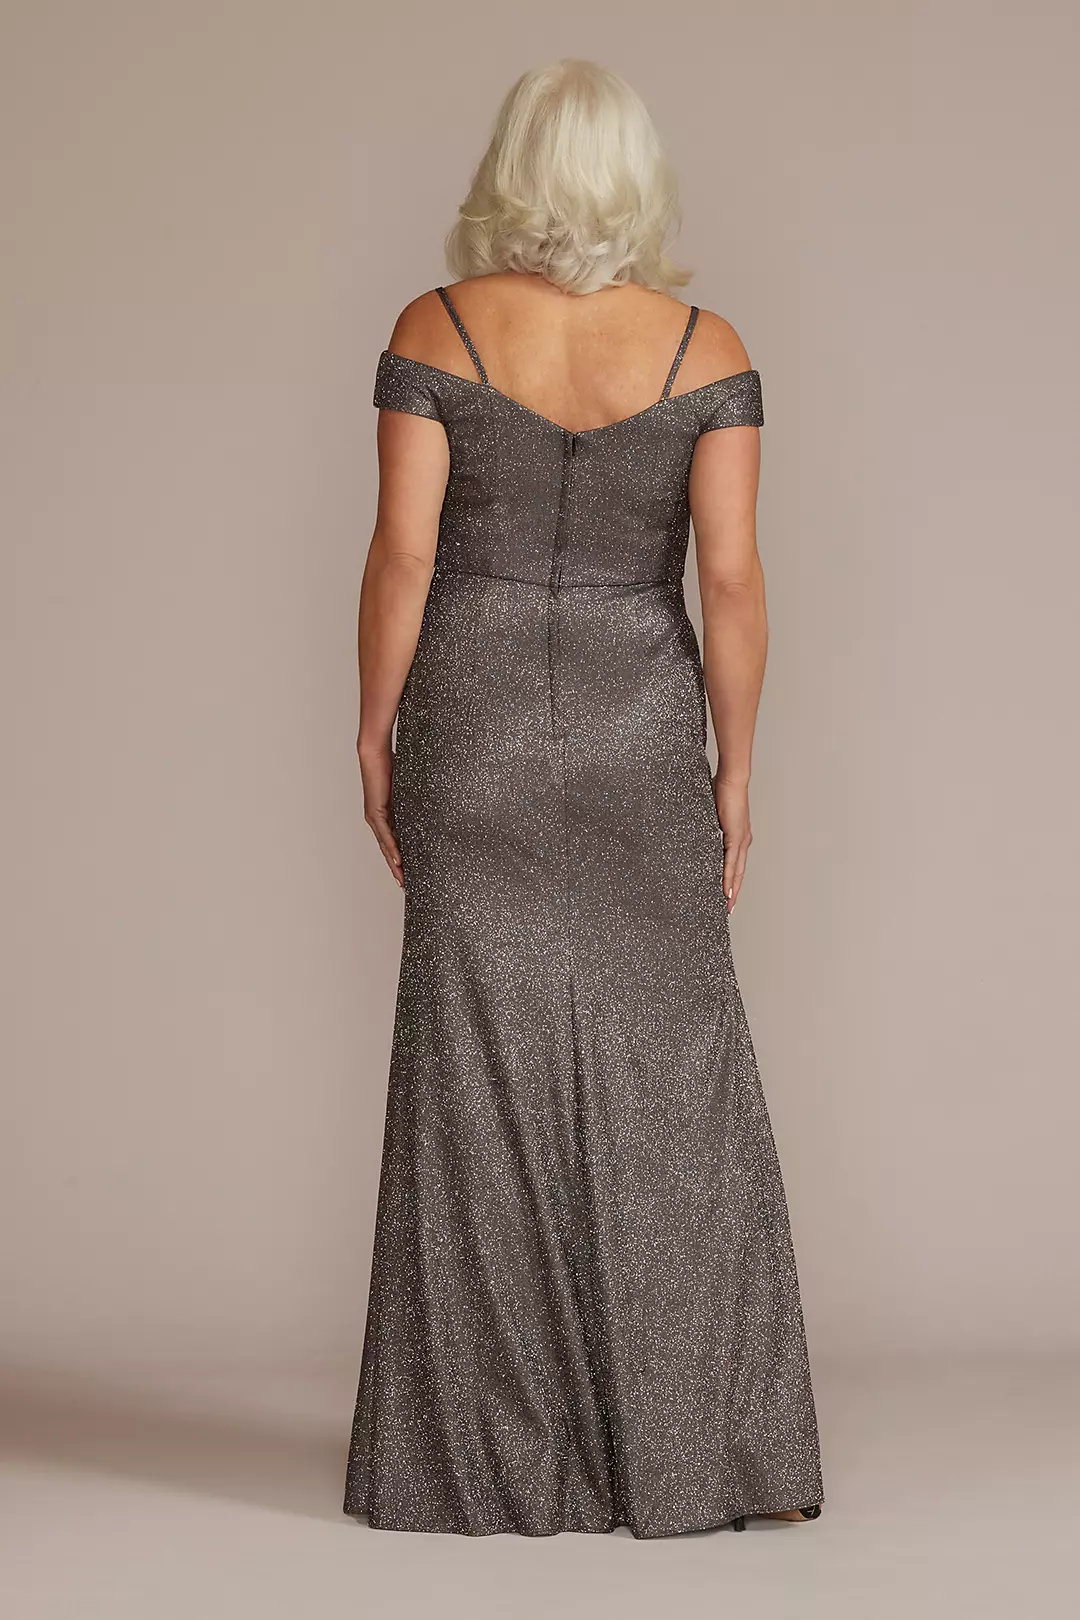 Off-the-Shoulder Metallic Sheath Gown Image 2